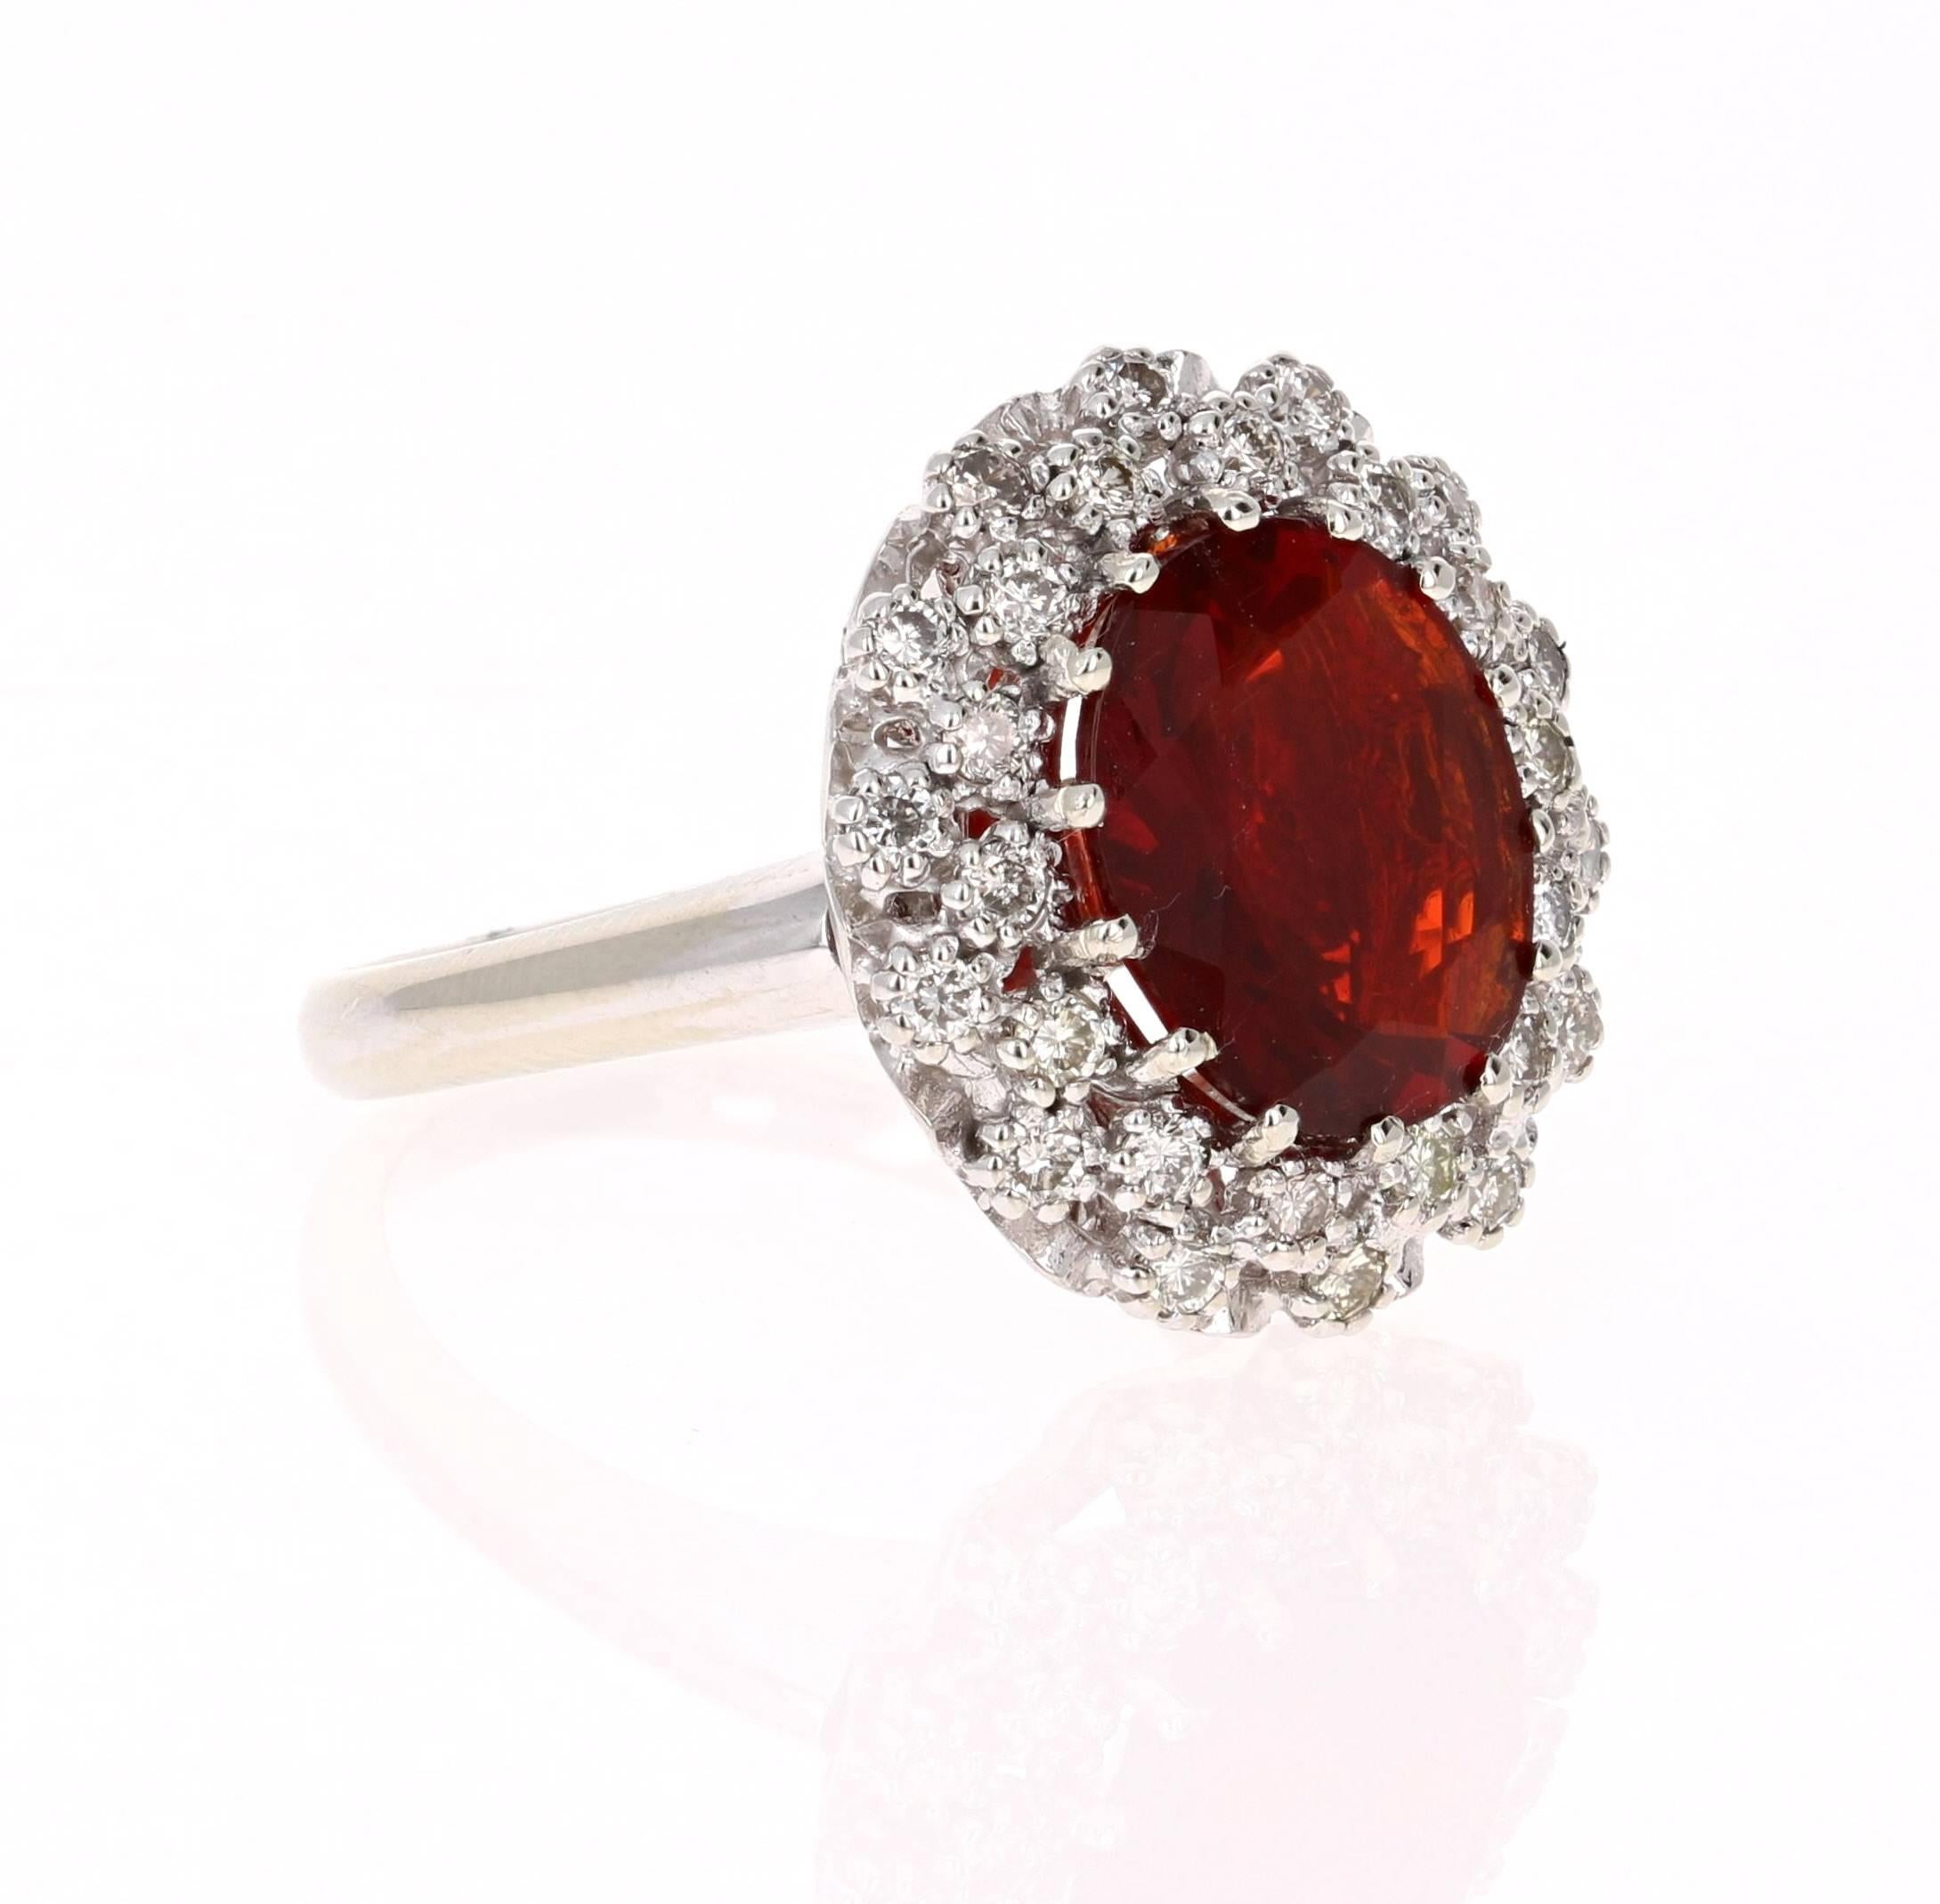 This gorgeous cocktail ring has a scintillating Oval Cut Fire Opal that weighs 2.64 carats and 28 Round Cut Diamonds that weigh 0.63 carats. The clarity and color of the diamonds are VS2-H.  The total carat weight of the ring is 3.27 carats. 

It is